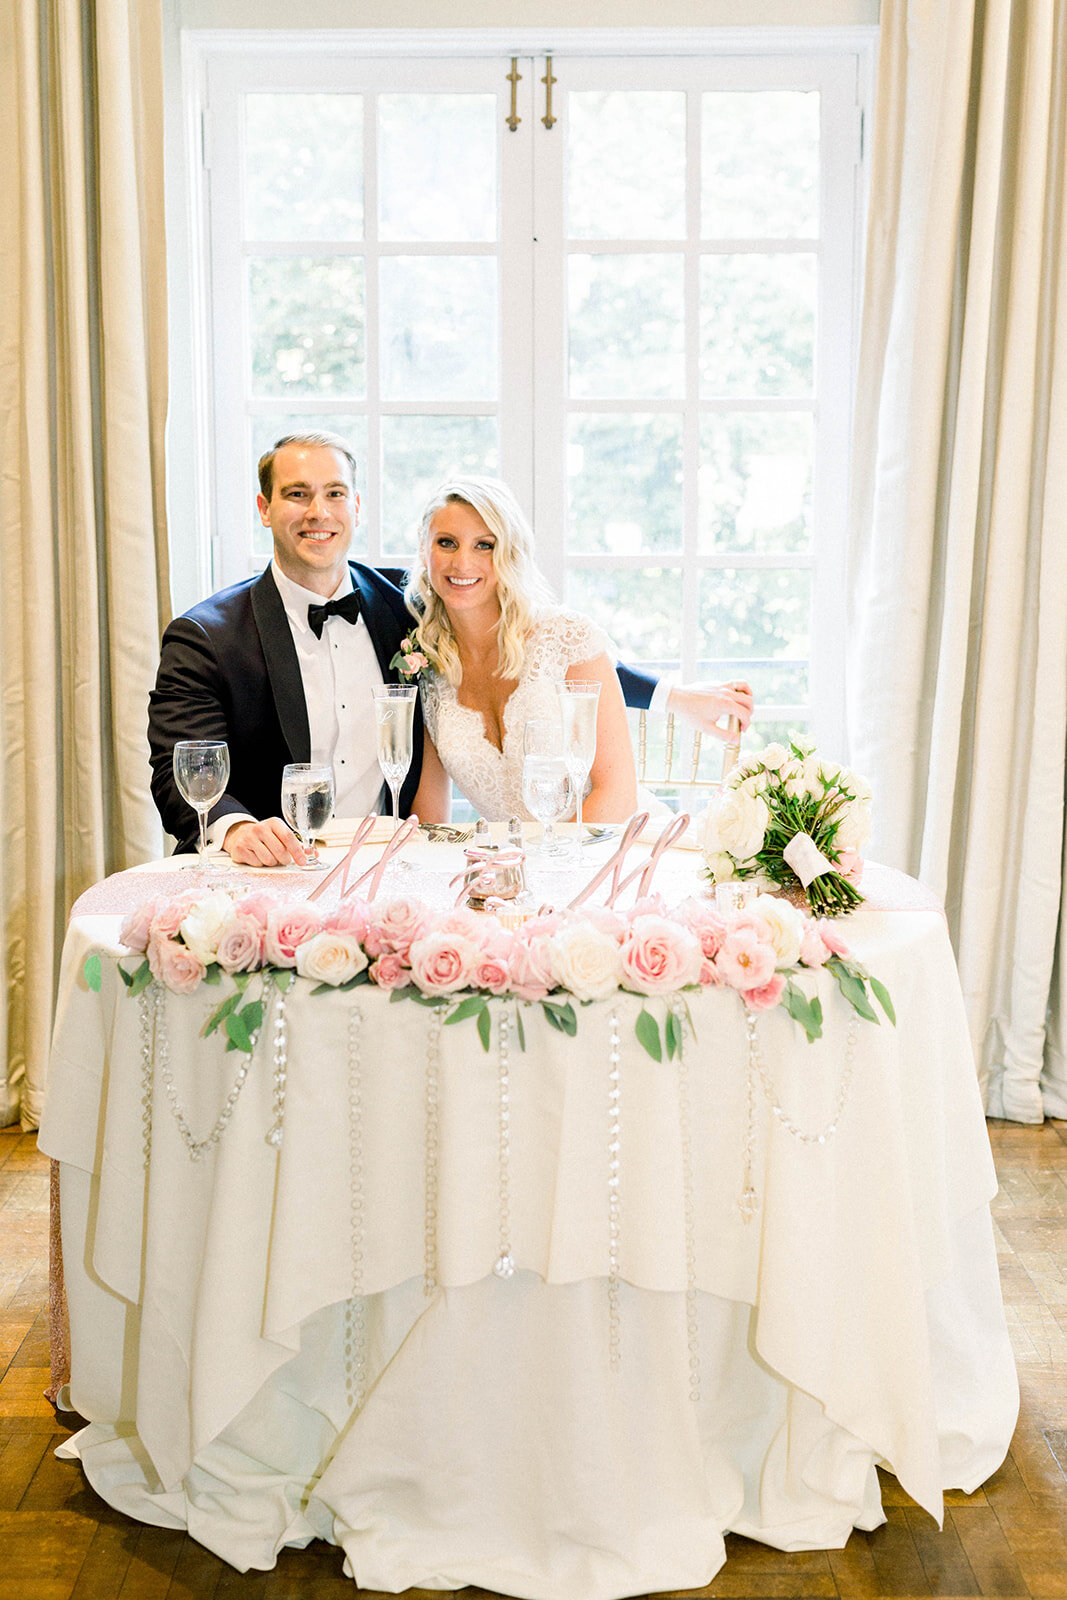 Pink and white floral wedding sweetheart table: Longue Vue Club Wedding captured by Abbie Tyler Photography